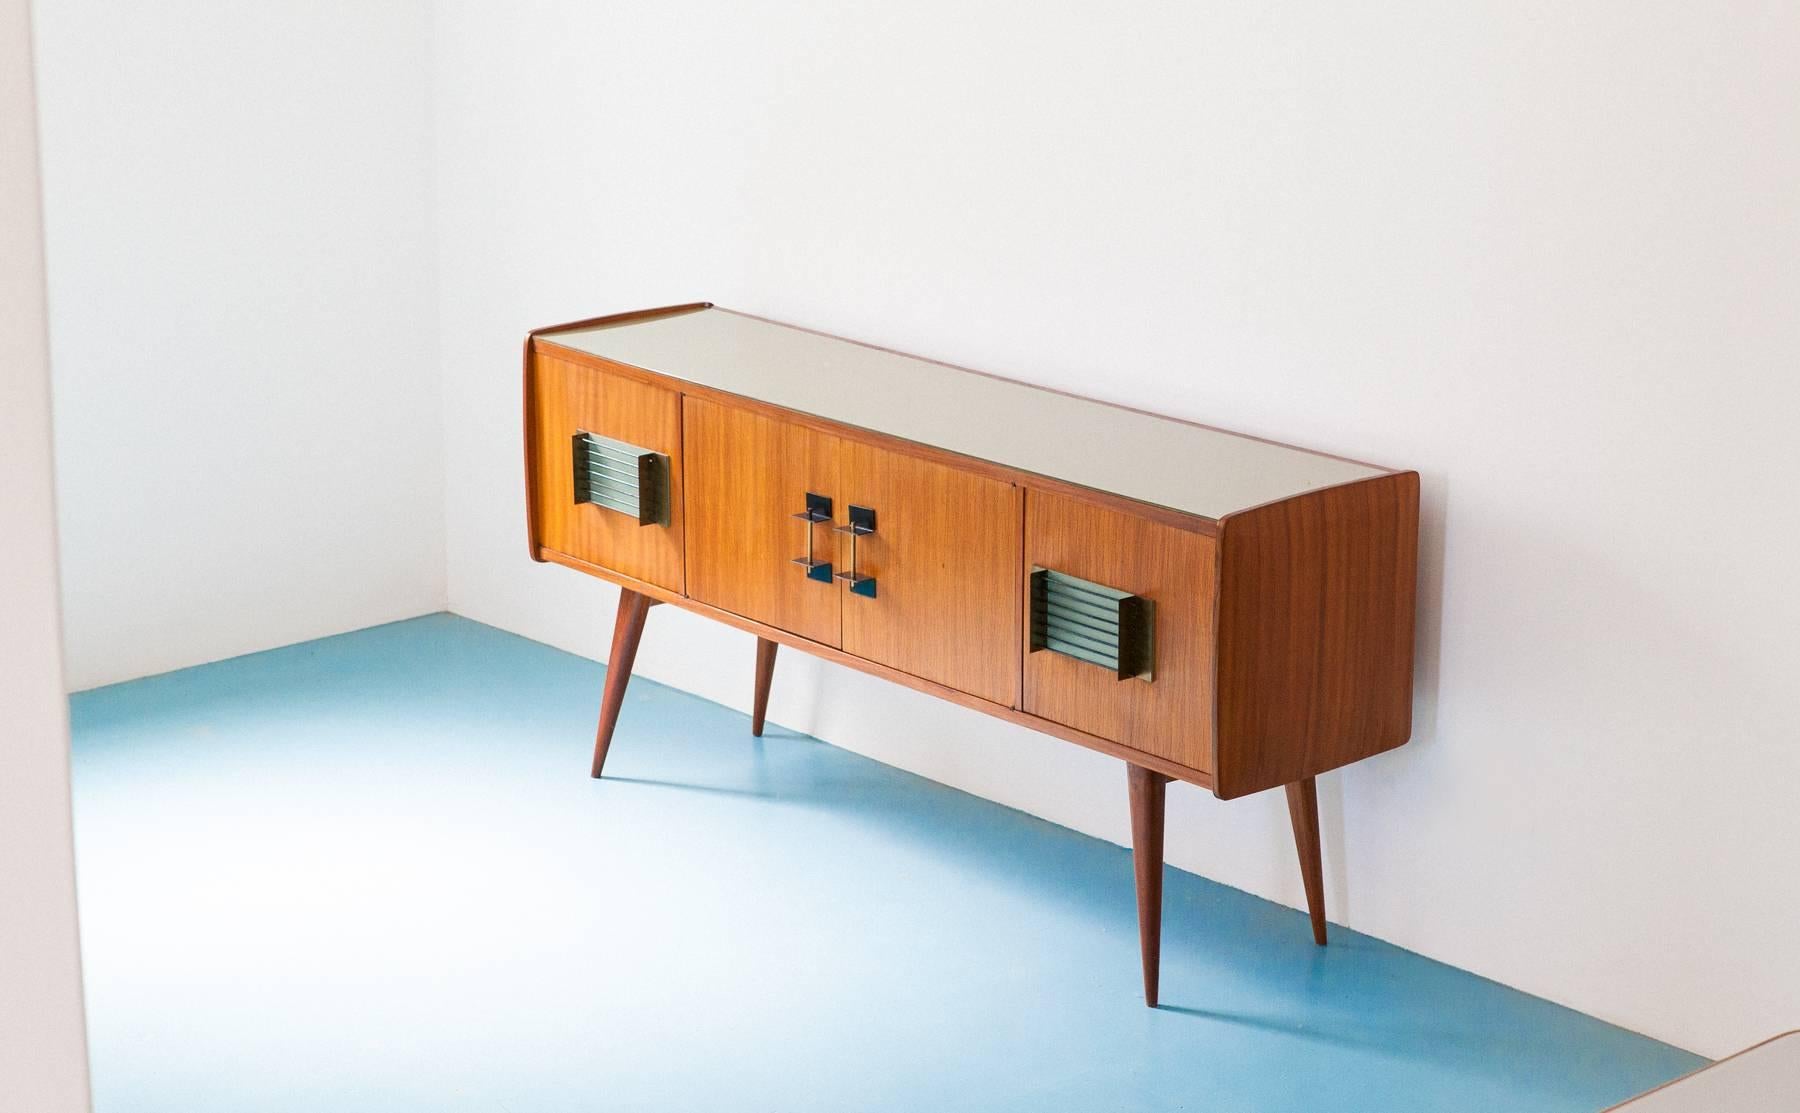 This modern sideboard was manufacture in Italy in 1950's
This Enfilade has a wooden cabinet that is  veneered in mahogany, the legs are in solid mahogany .The handles, which we believe to be the most interesting and particular part, were made of